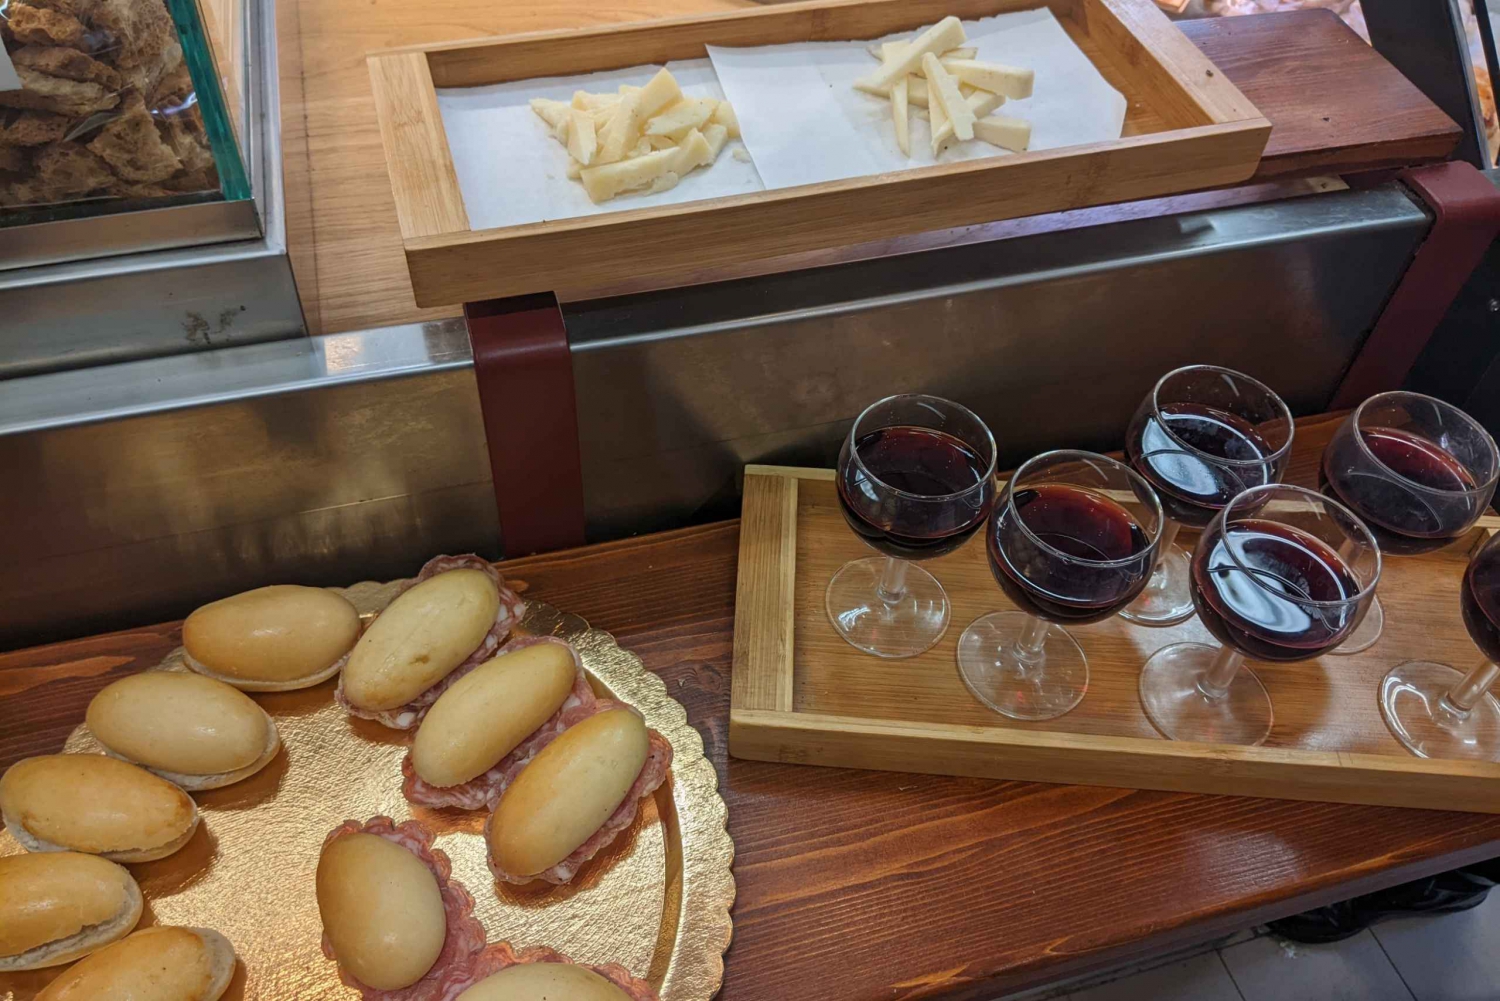 Florence Food Tour with All’Antico Vinaio skip the line